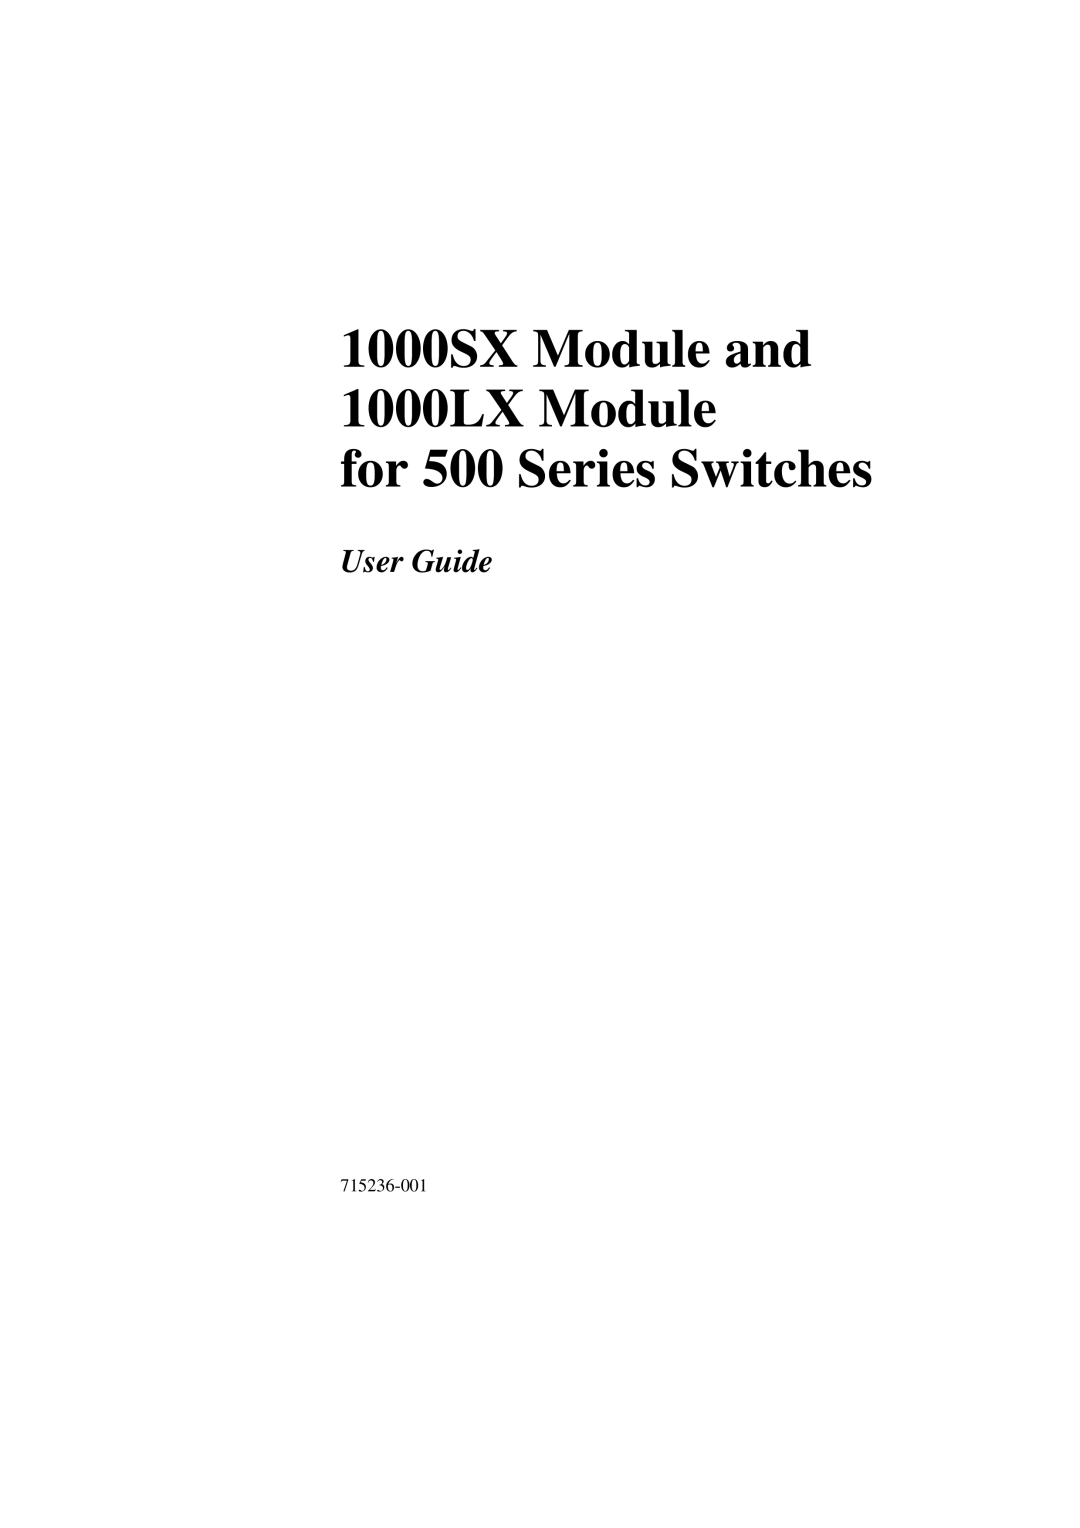 Intel manual 1000SX Module and 1000LX Module for 500 Series Switches, User Guide, 715236-001 